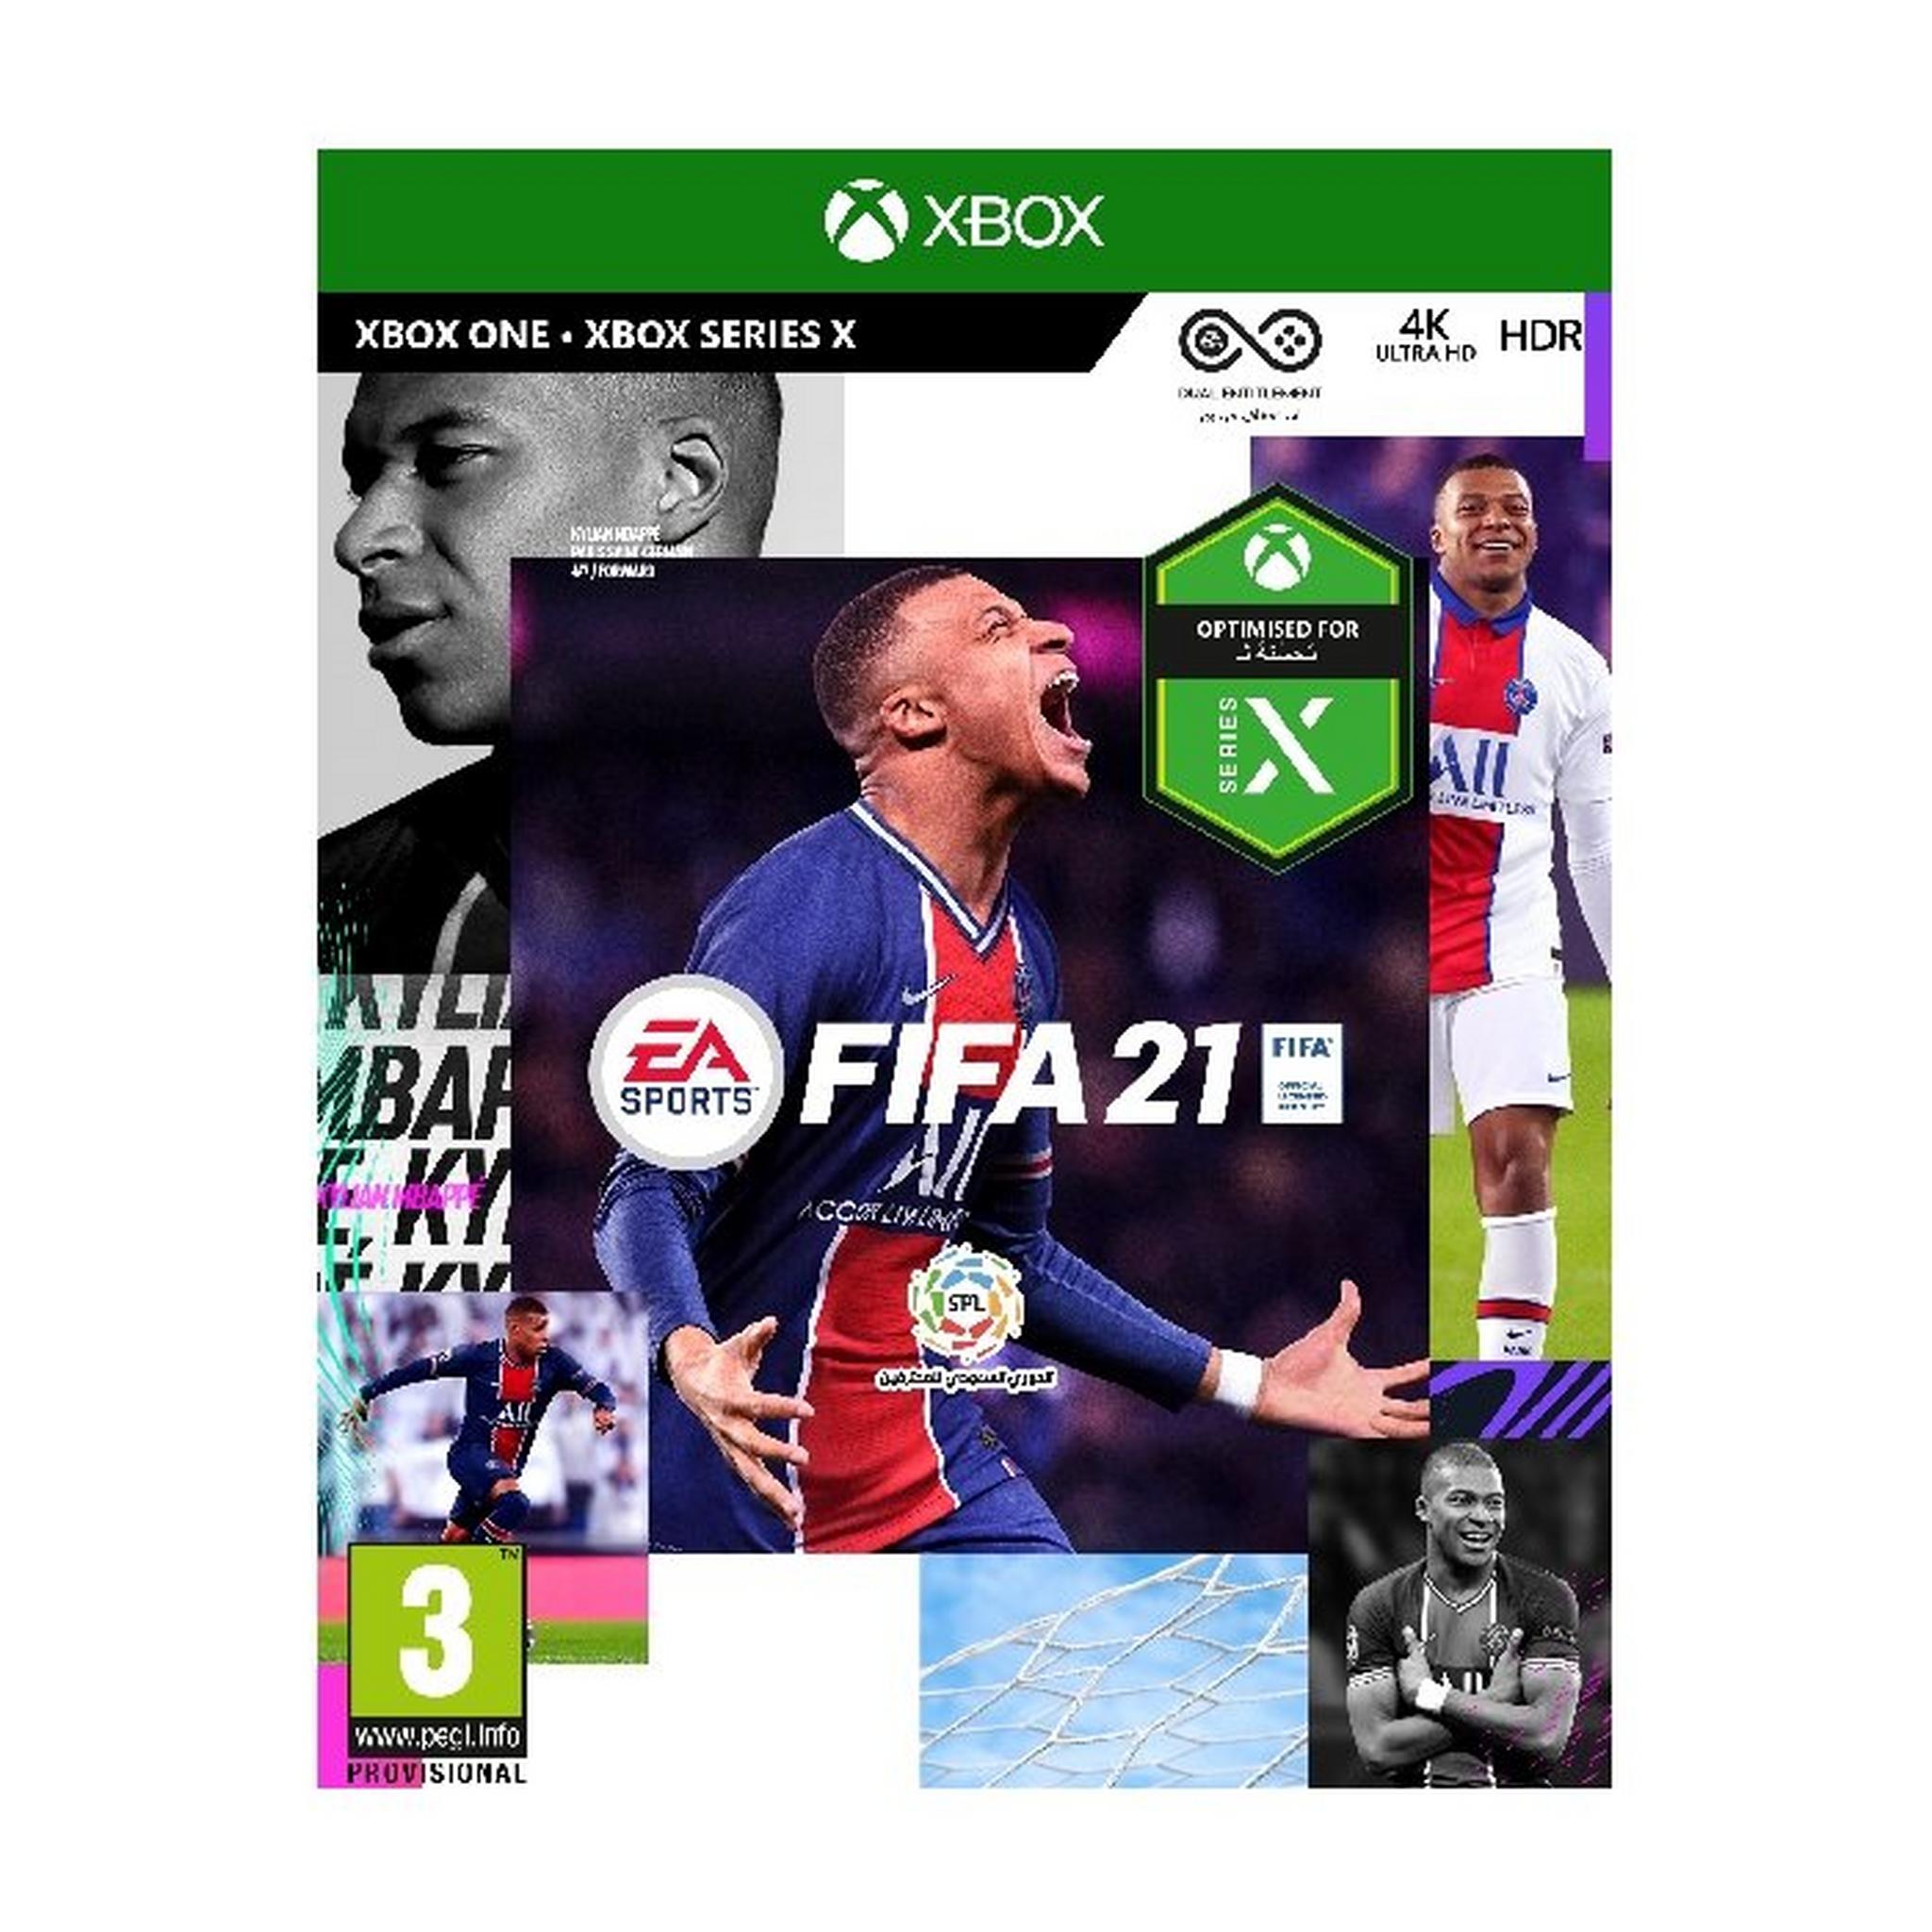 FIFA 21 Standard Edition - XBOX one Game